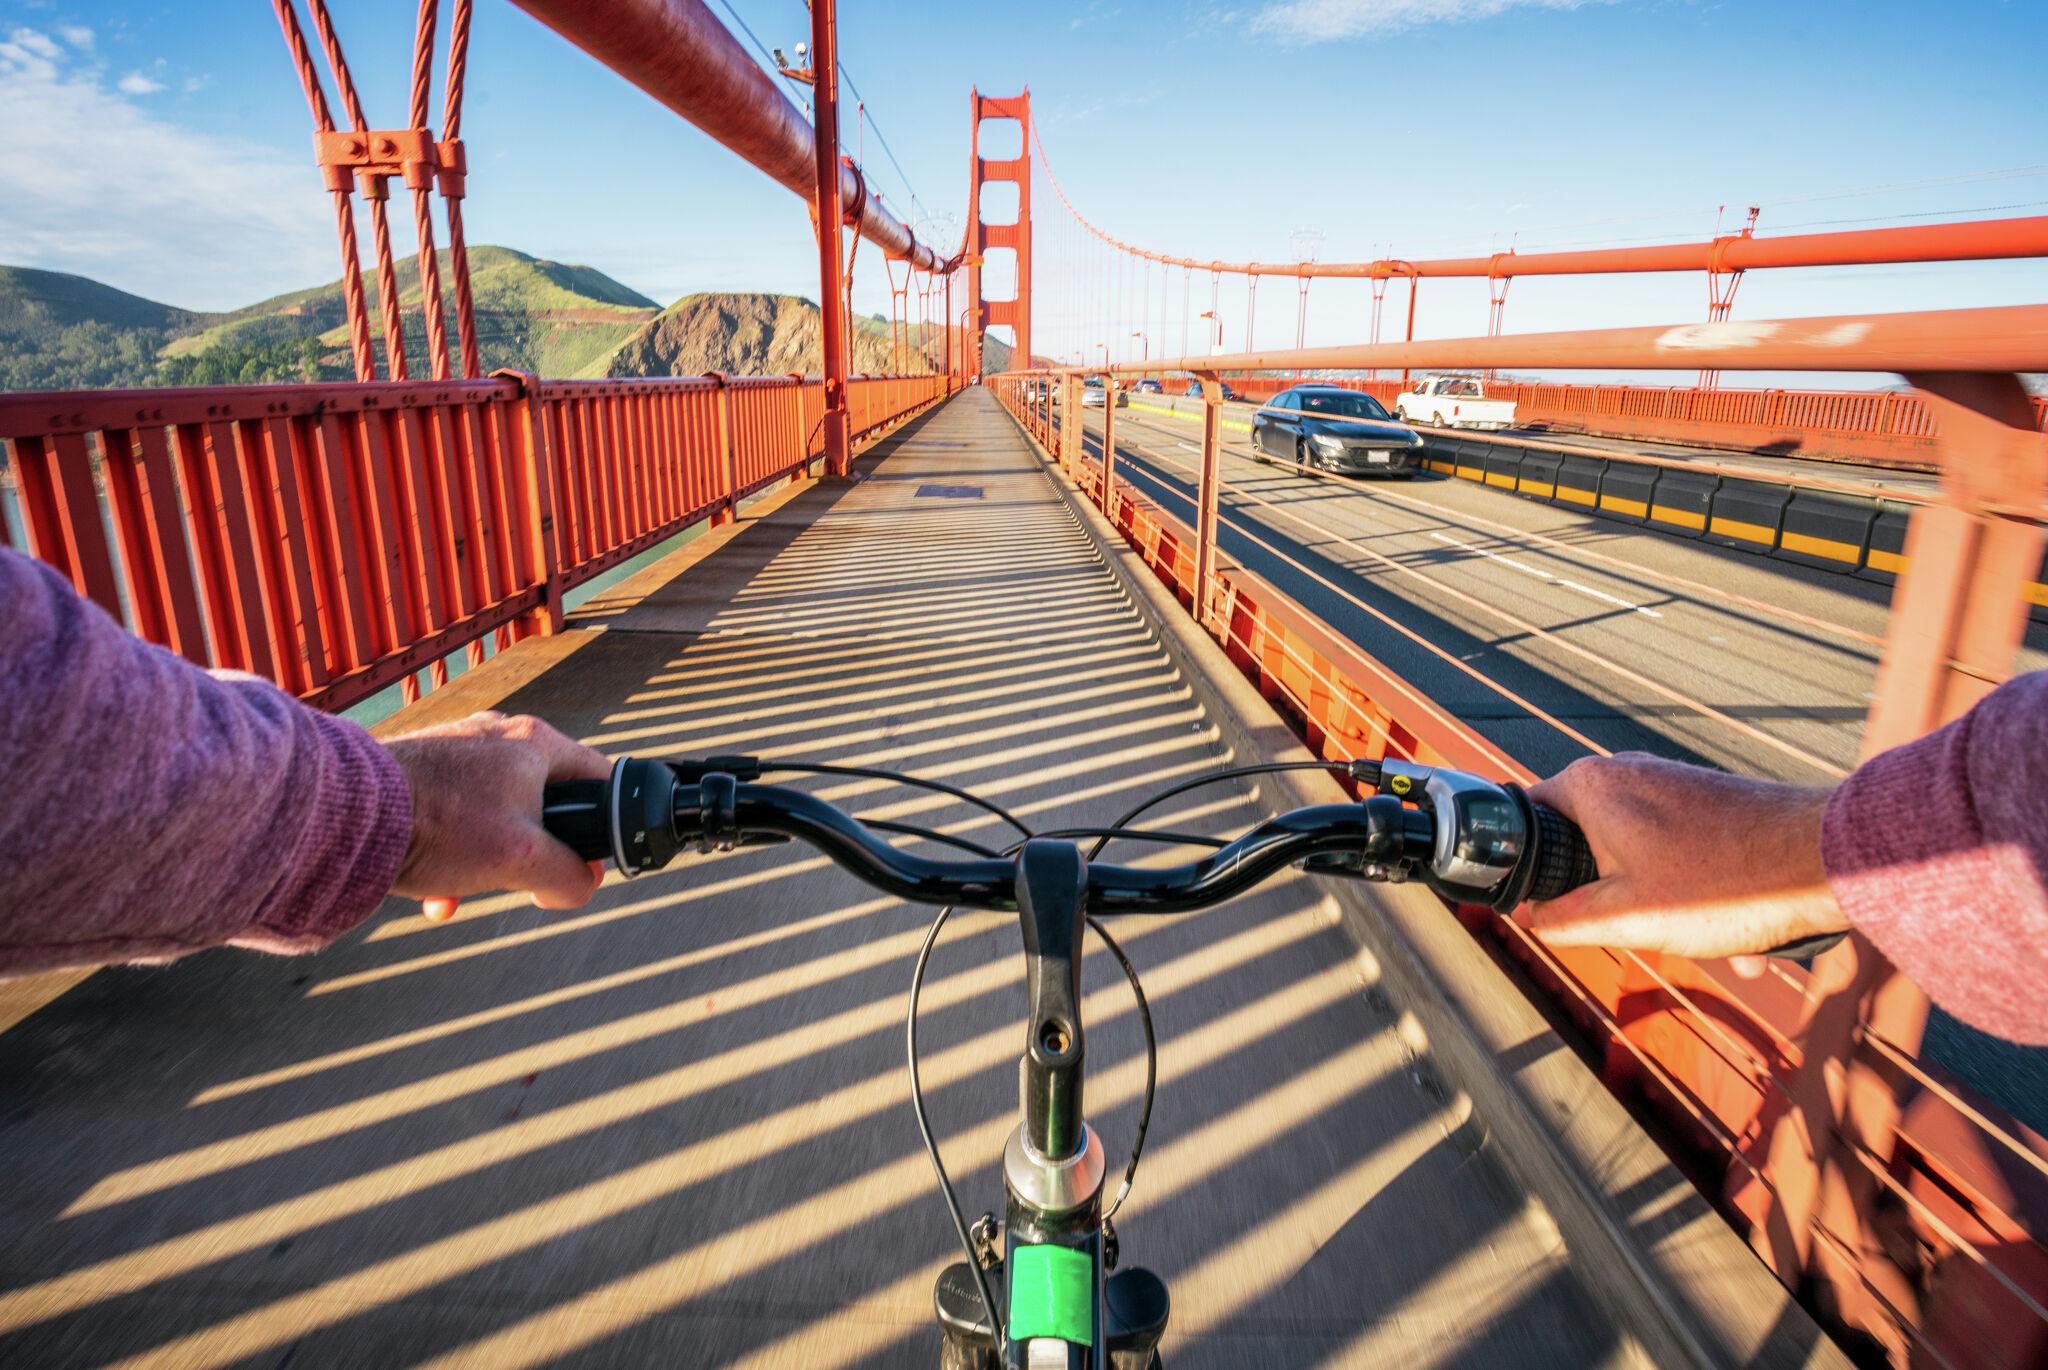 Bike Rentals In San Francisco All To Know And Best Routes